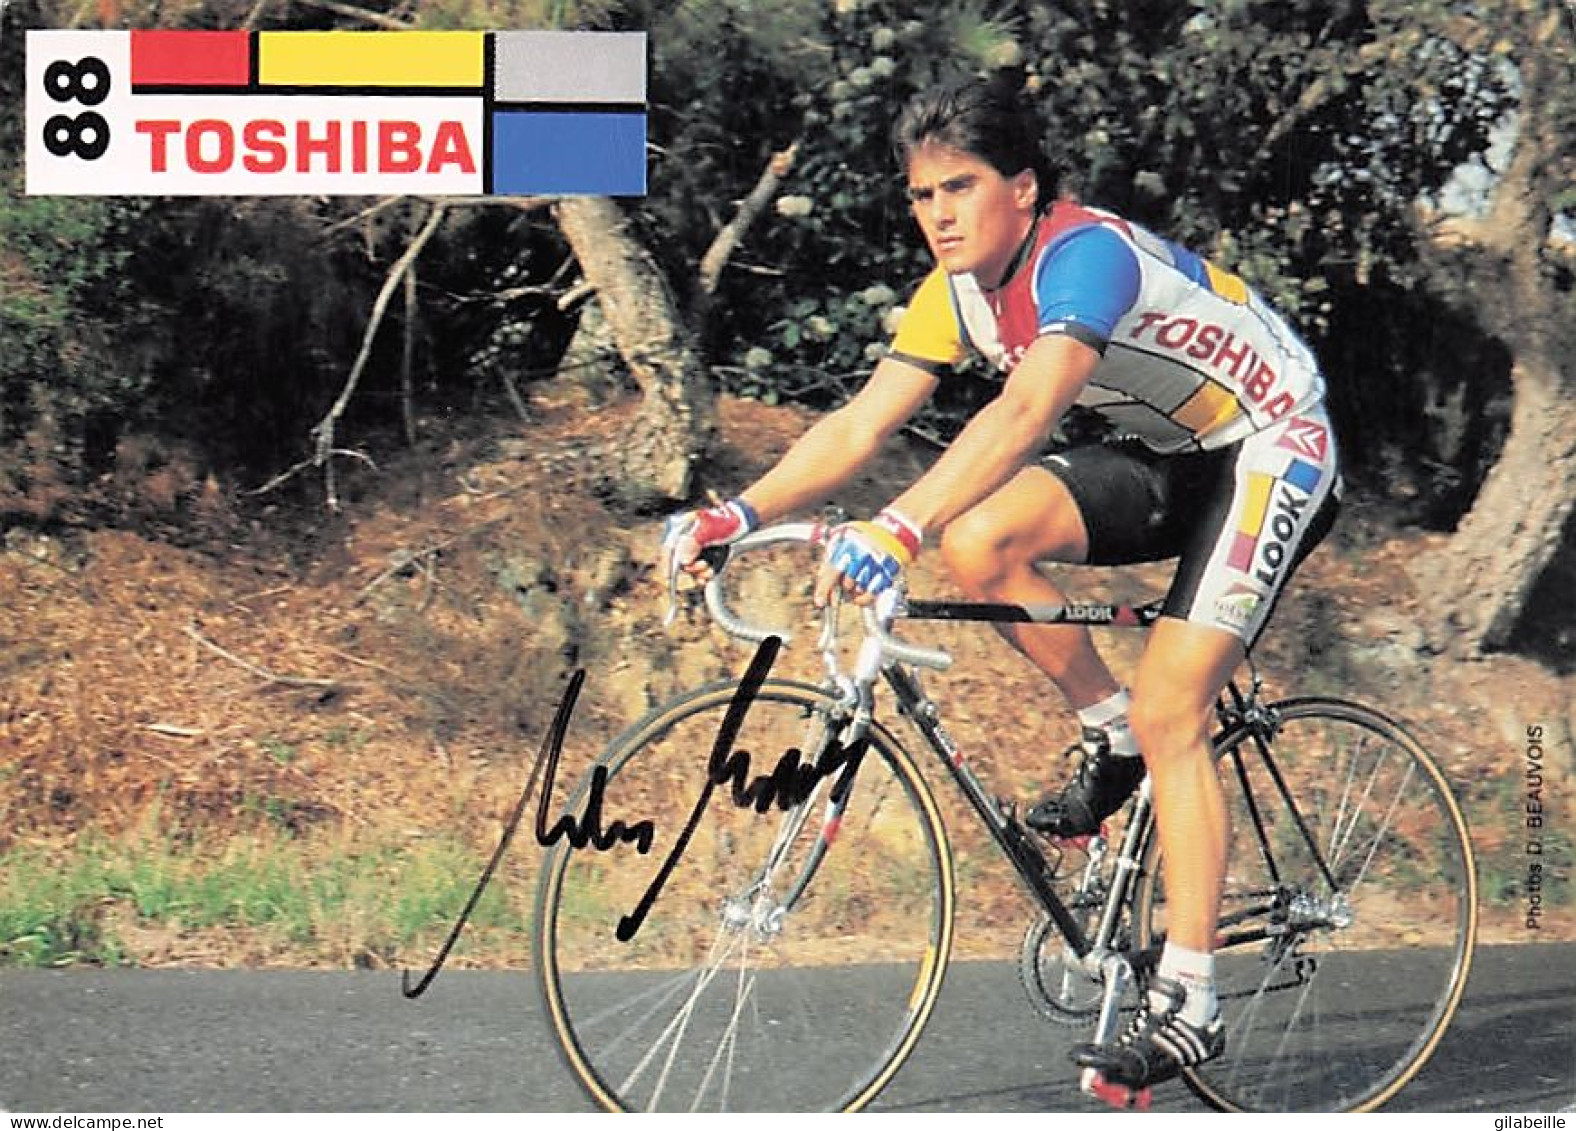 Vélo Coureur Cycliste Allemand Andreas Kappes - Team Toshiba  -   Cycling - Cyclisme - Ciclismo - Wielrennen - Signée - Cycling